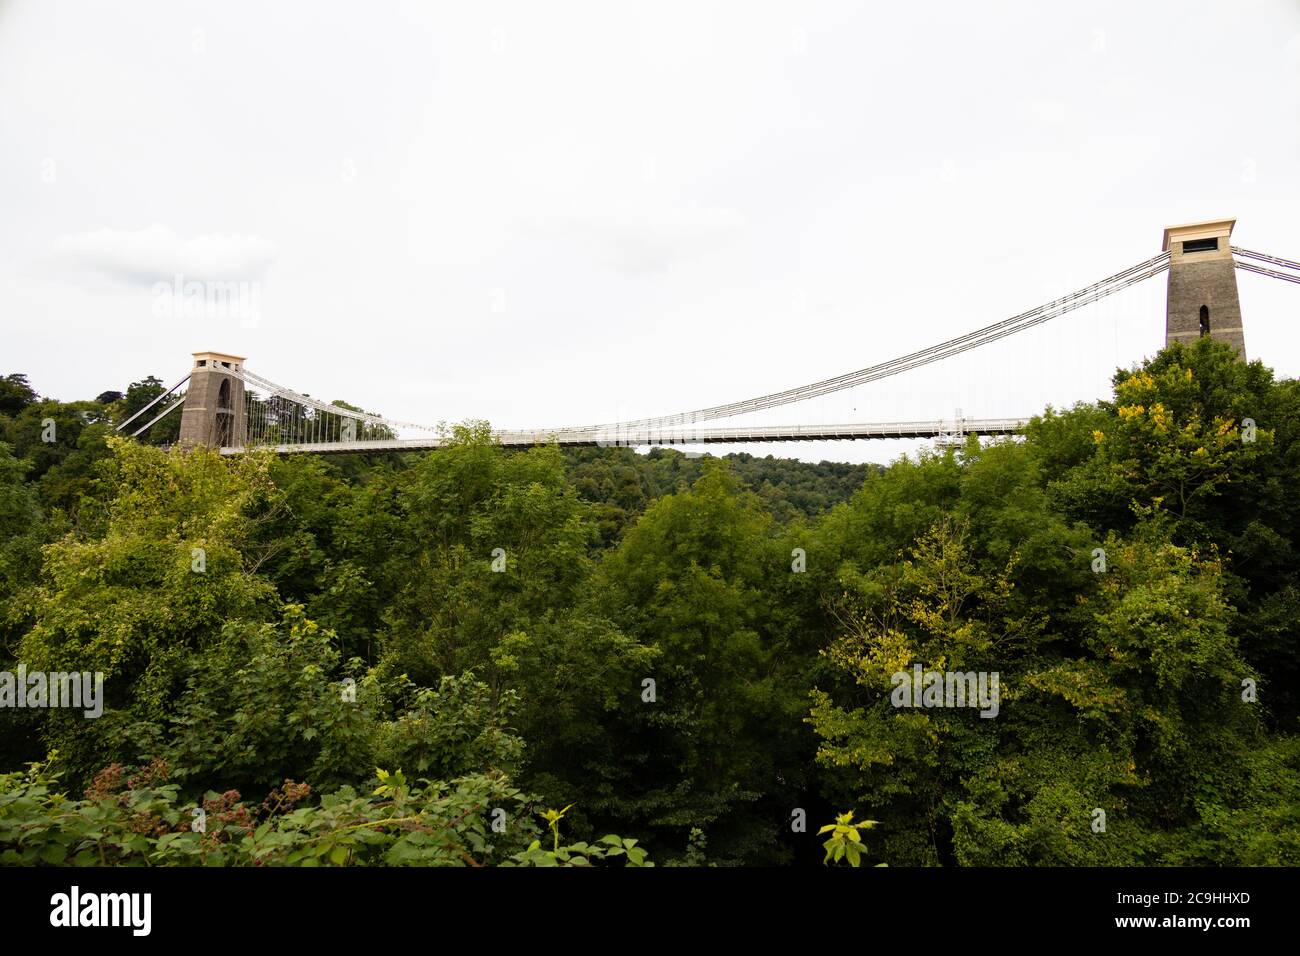 Isambard Kingdom Brunel Clifton Suspension Bridge over the Avon Gorge, seen from the Lectern, between Clifton and Leigh Woods in North Somerset. Brist Stock Photo